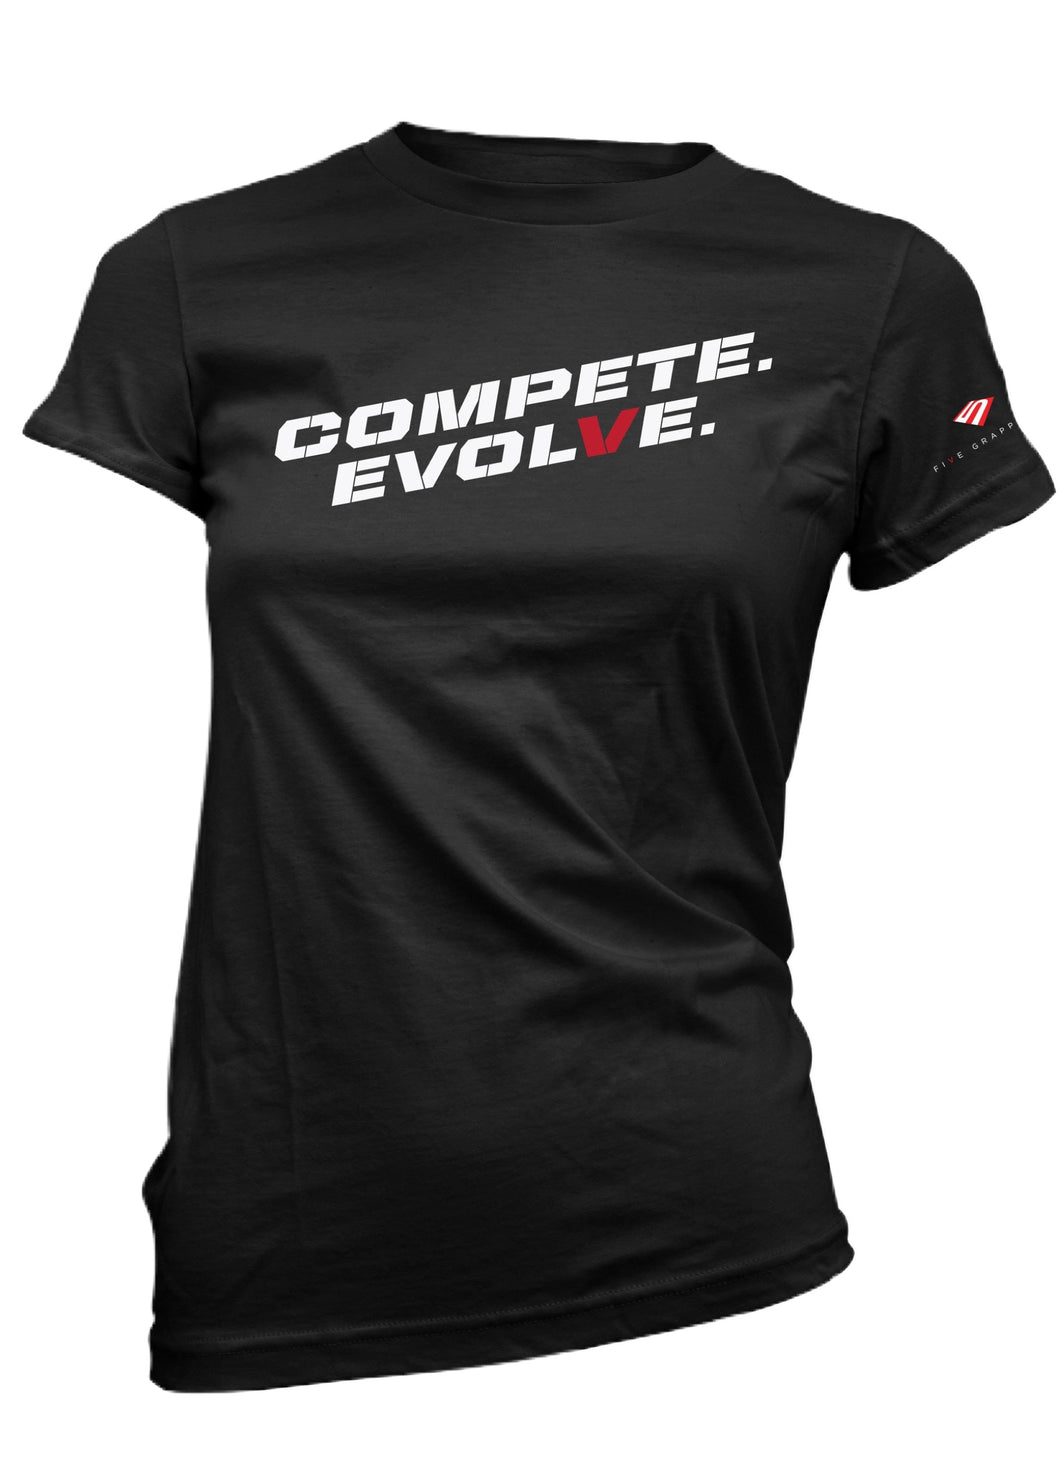 FIVE COMPETE. EVOLVE. BABY DOLL T | WOMEN'S